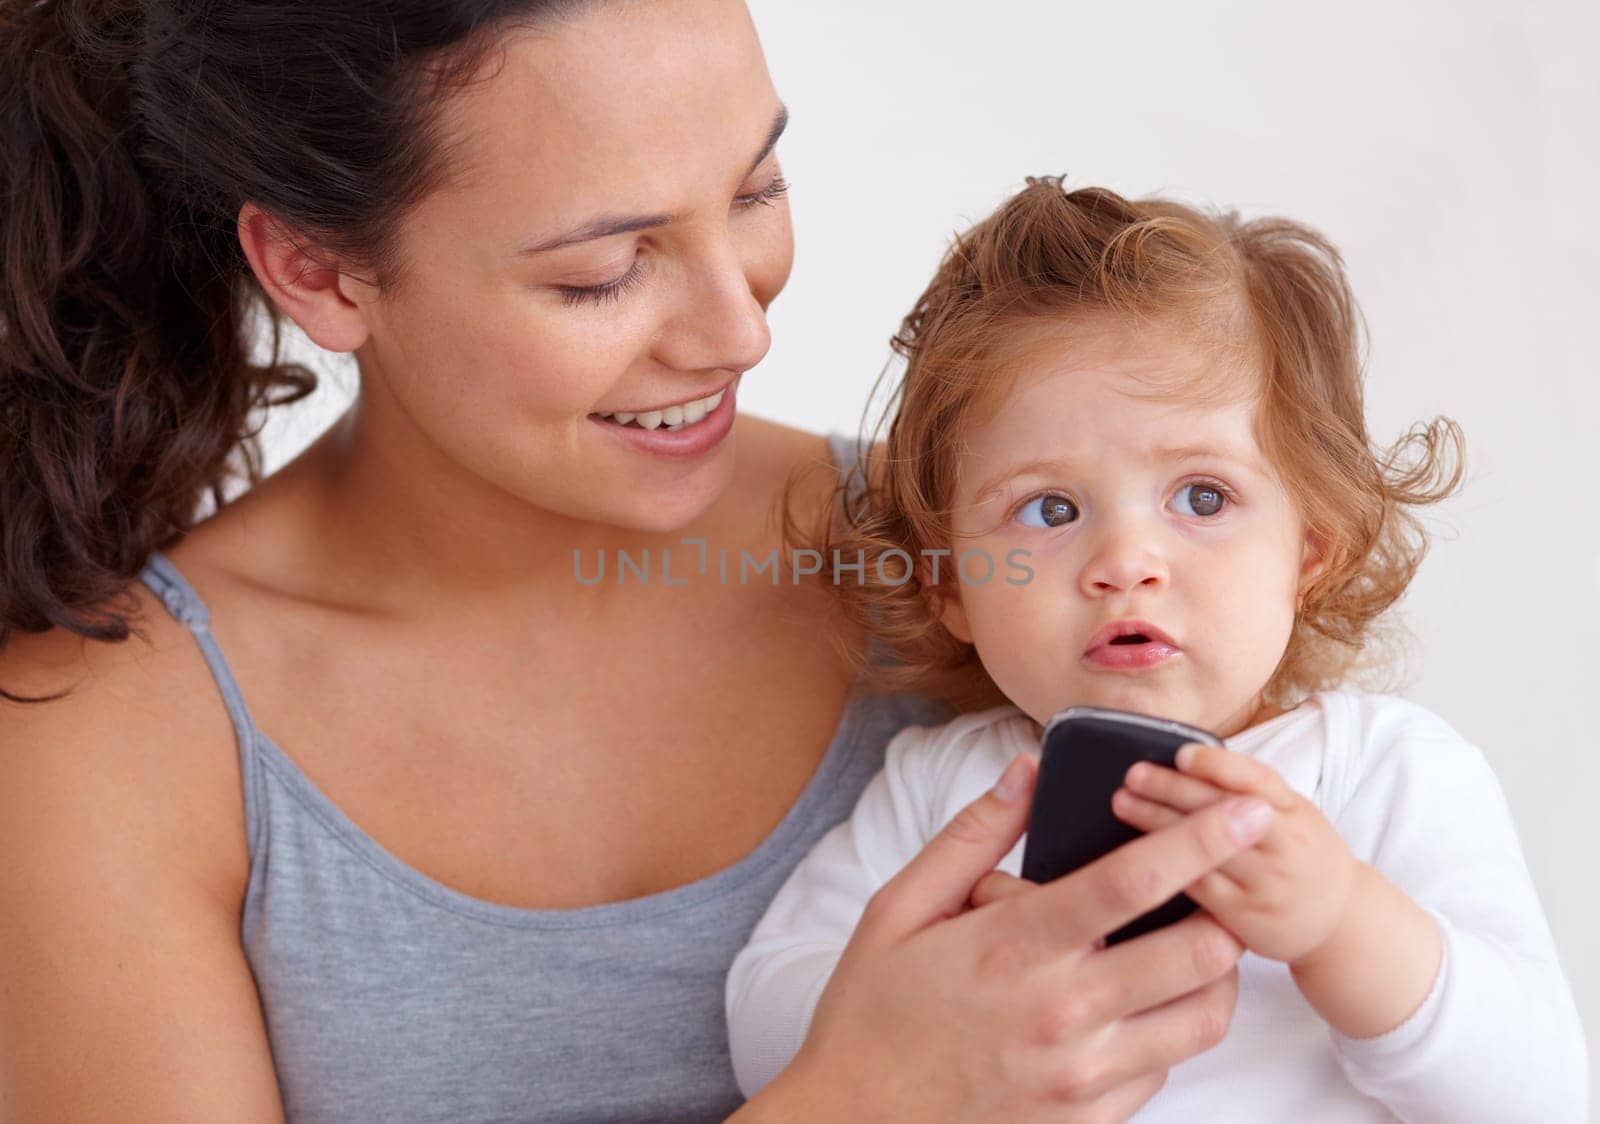 I love mommys cellphone. An adorable baby girl holding her mothers mobile phone